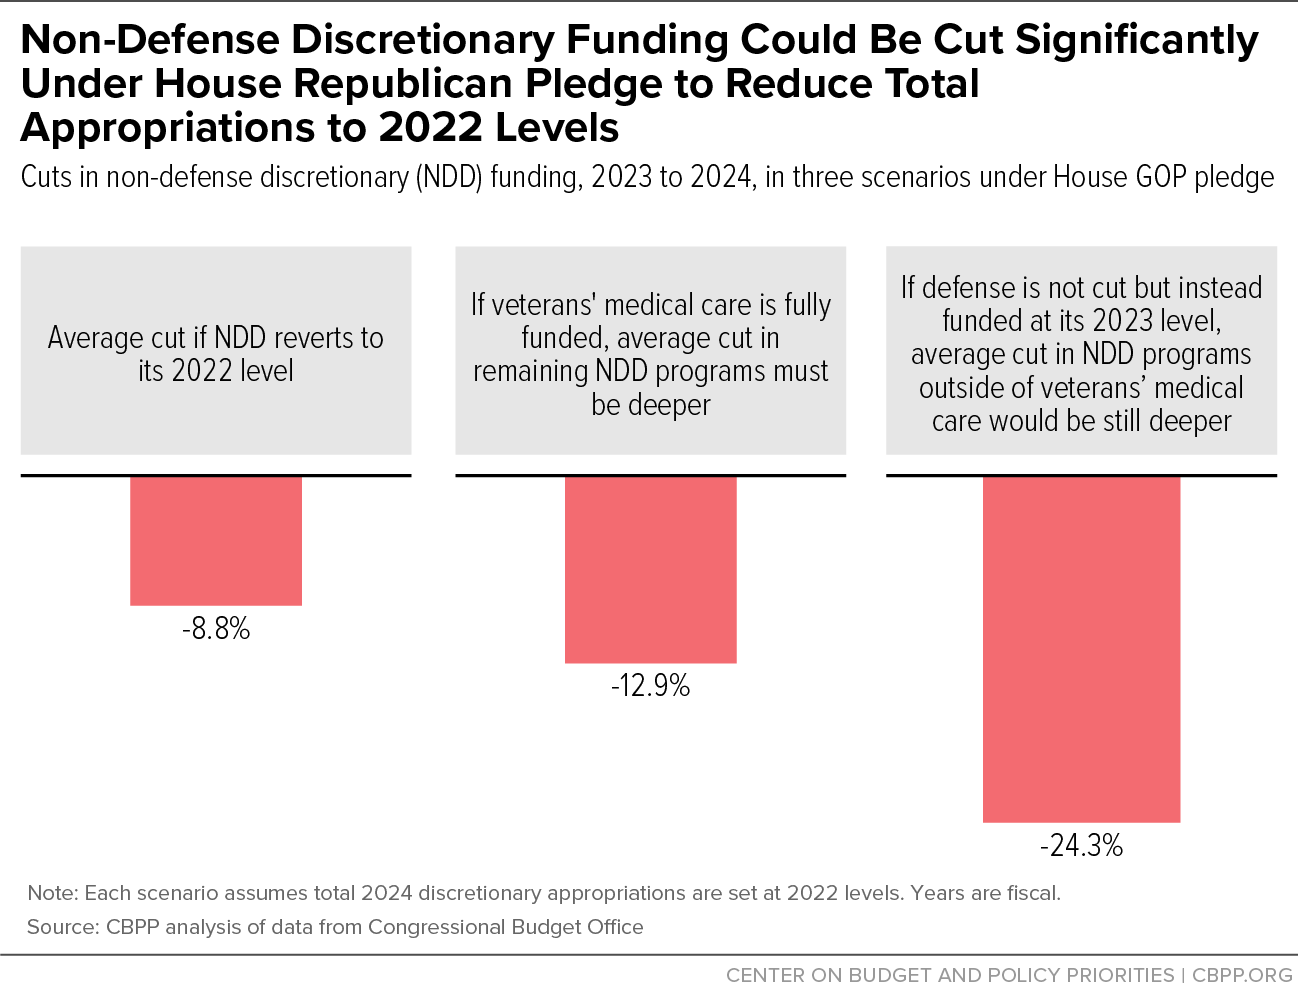 Non-Defense Discretionary Funding Could Be Cut Significantly Under House Republican Pledge to Reduce Total Appropriations to 2022 Levels